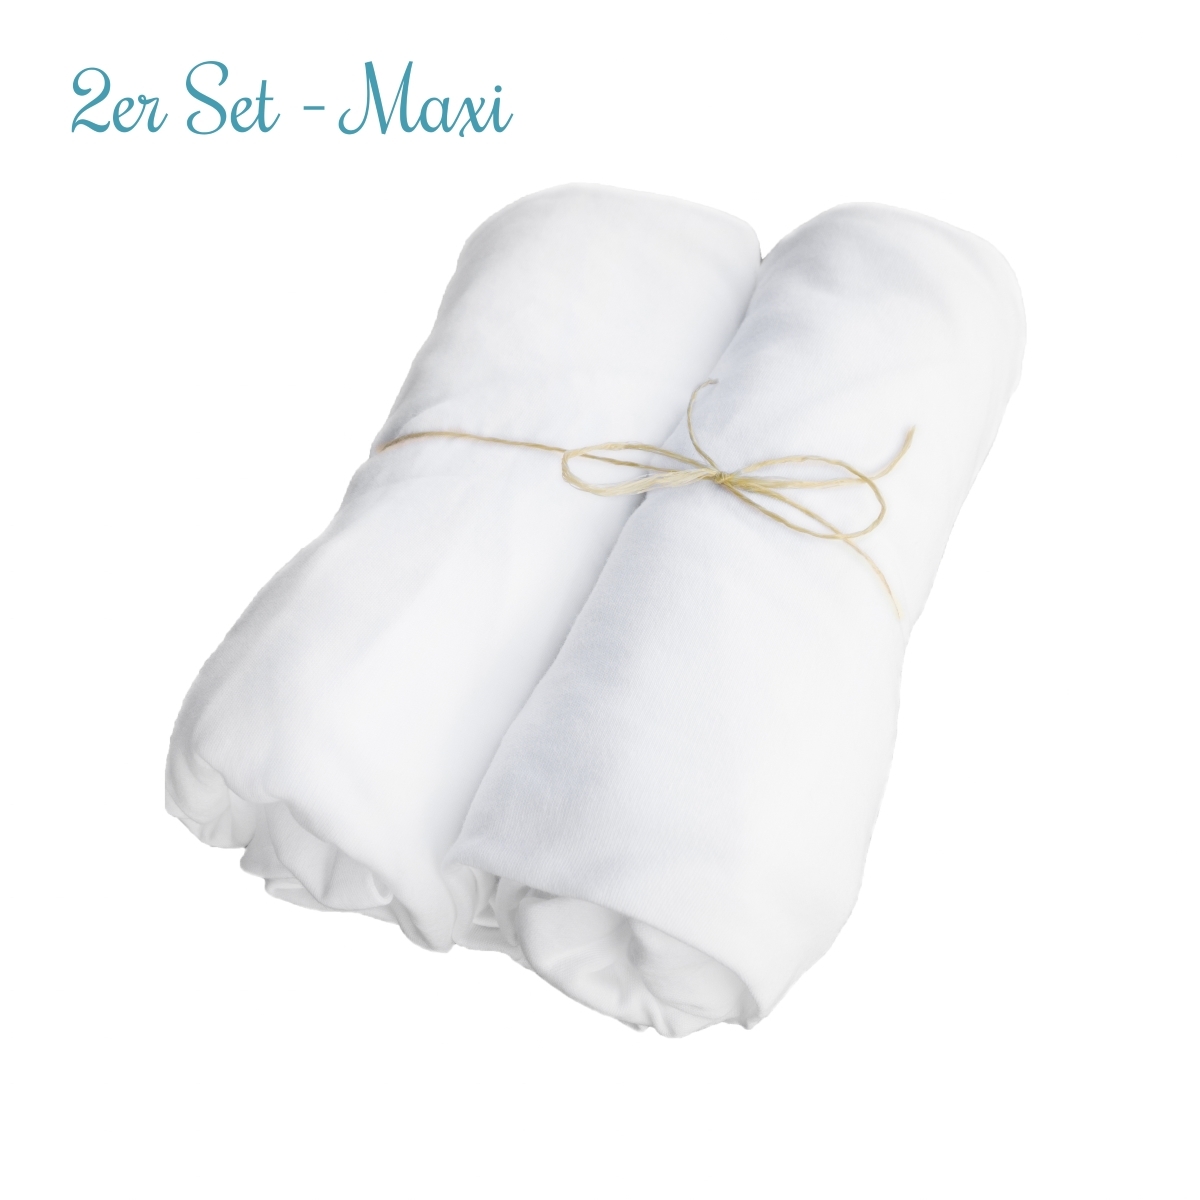 2-piece set fitted sheets - MAXI - 70x120